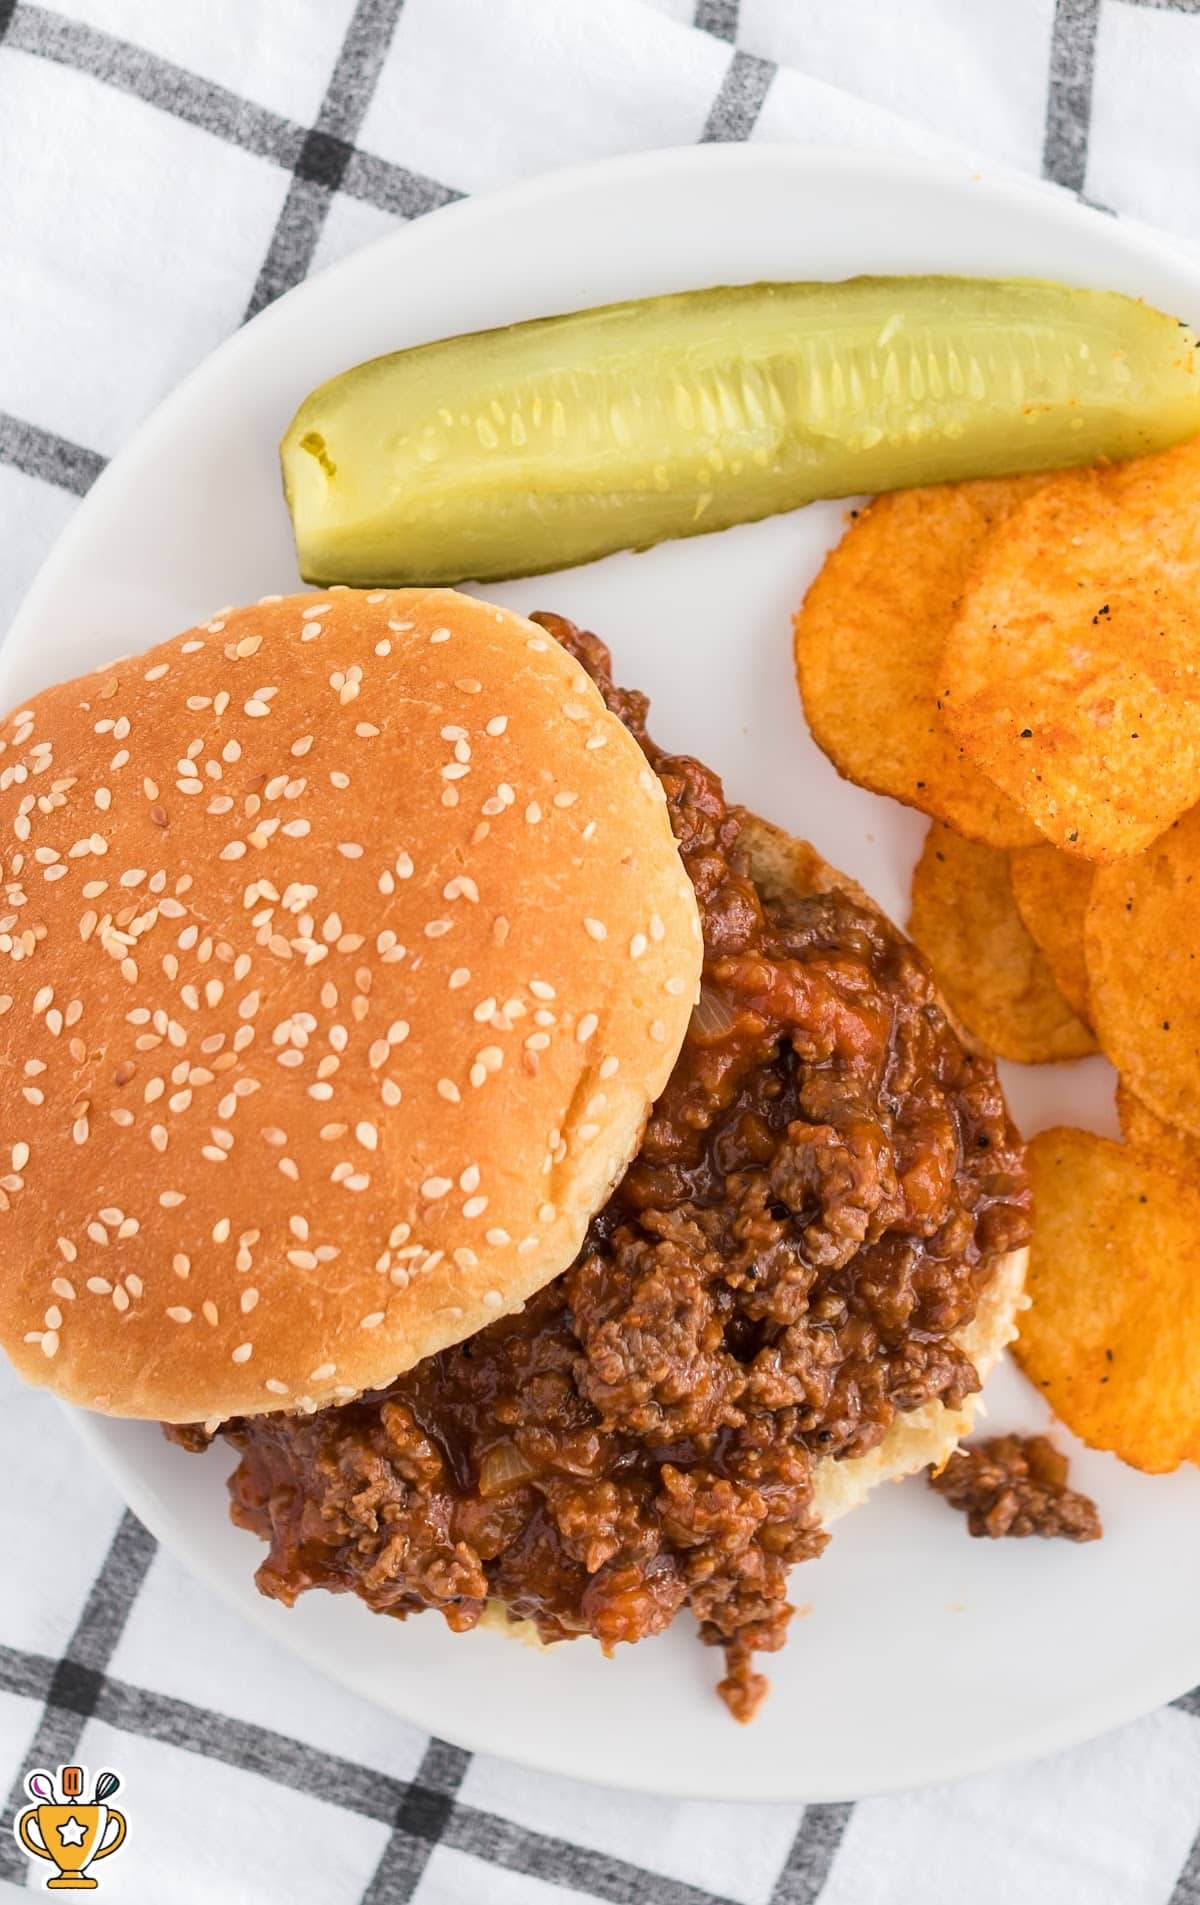 sloppy Joe sandwich with a pickle and chips